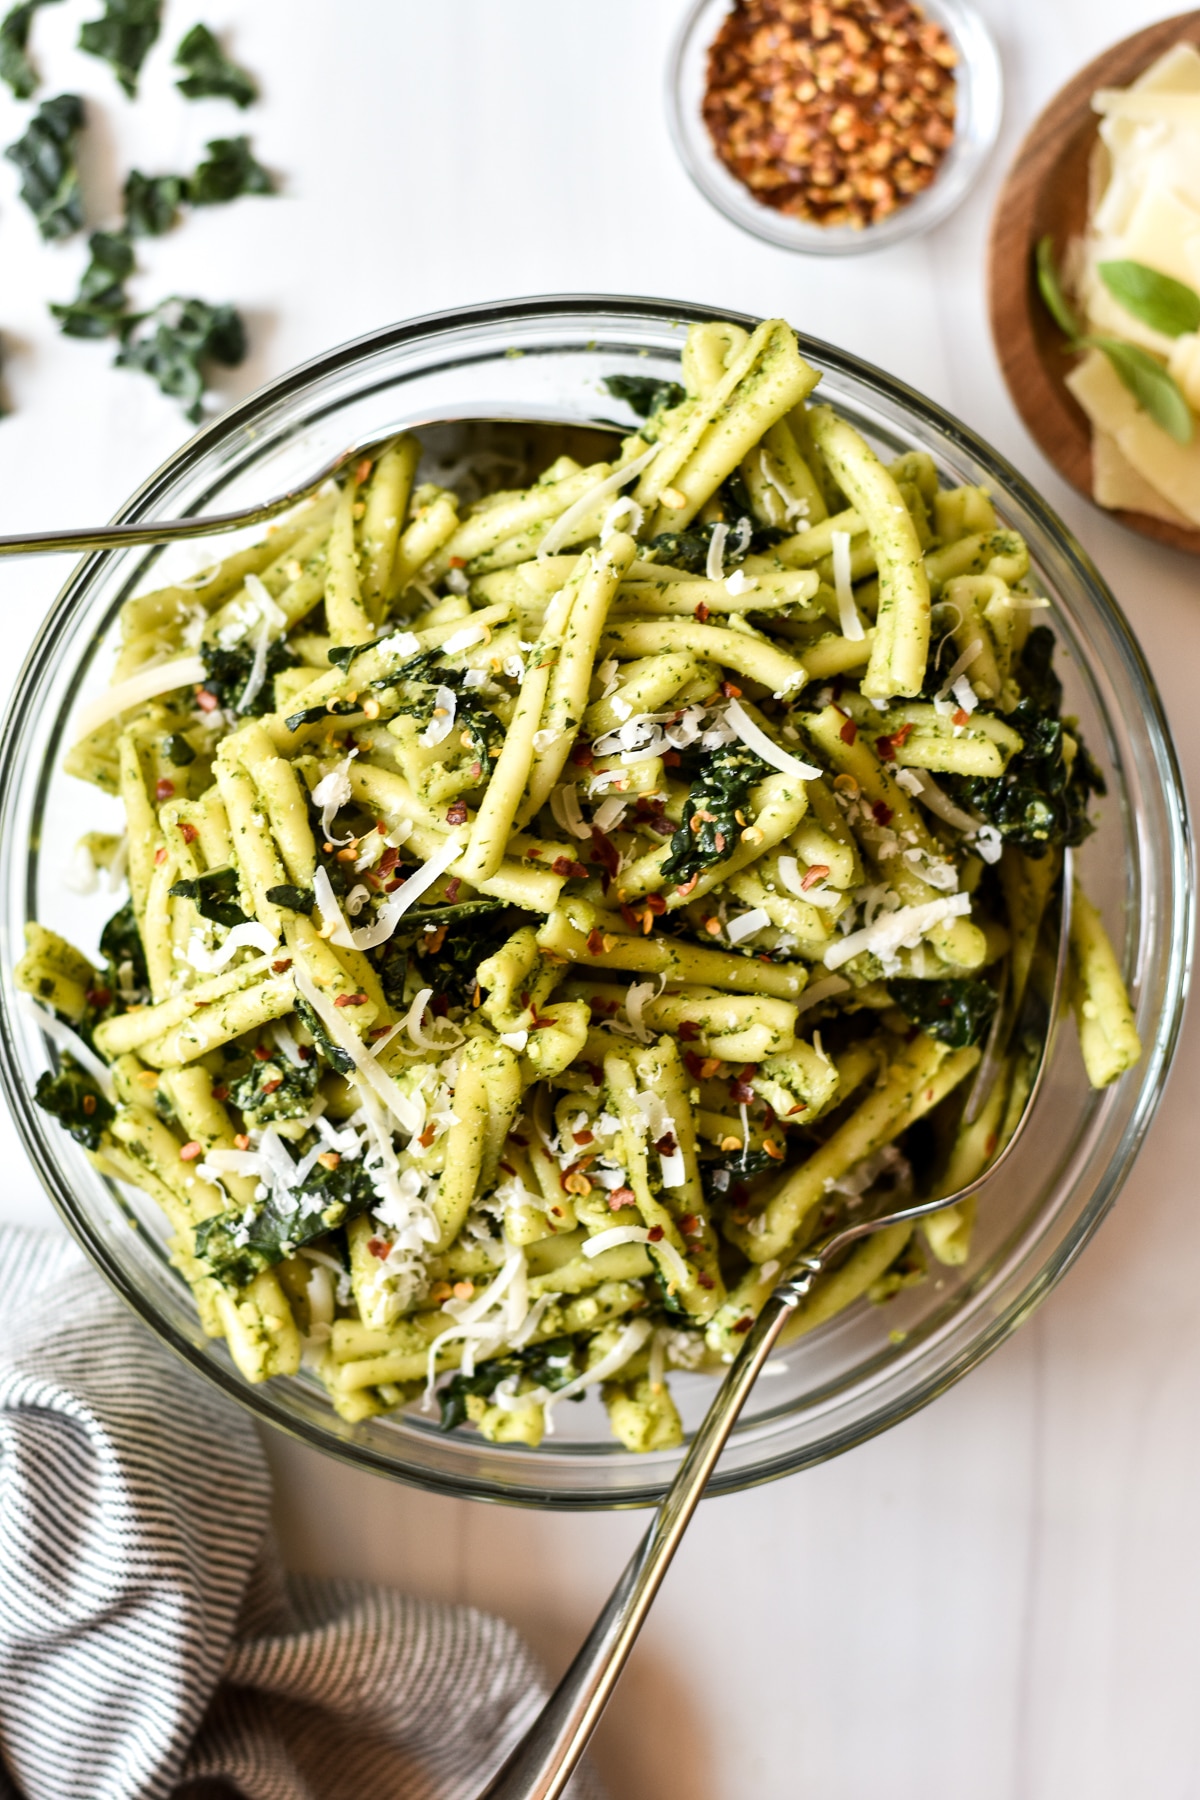 How To Wash & Store Greens // Pasta Salad with Kale & Pesto